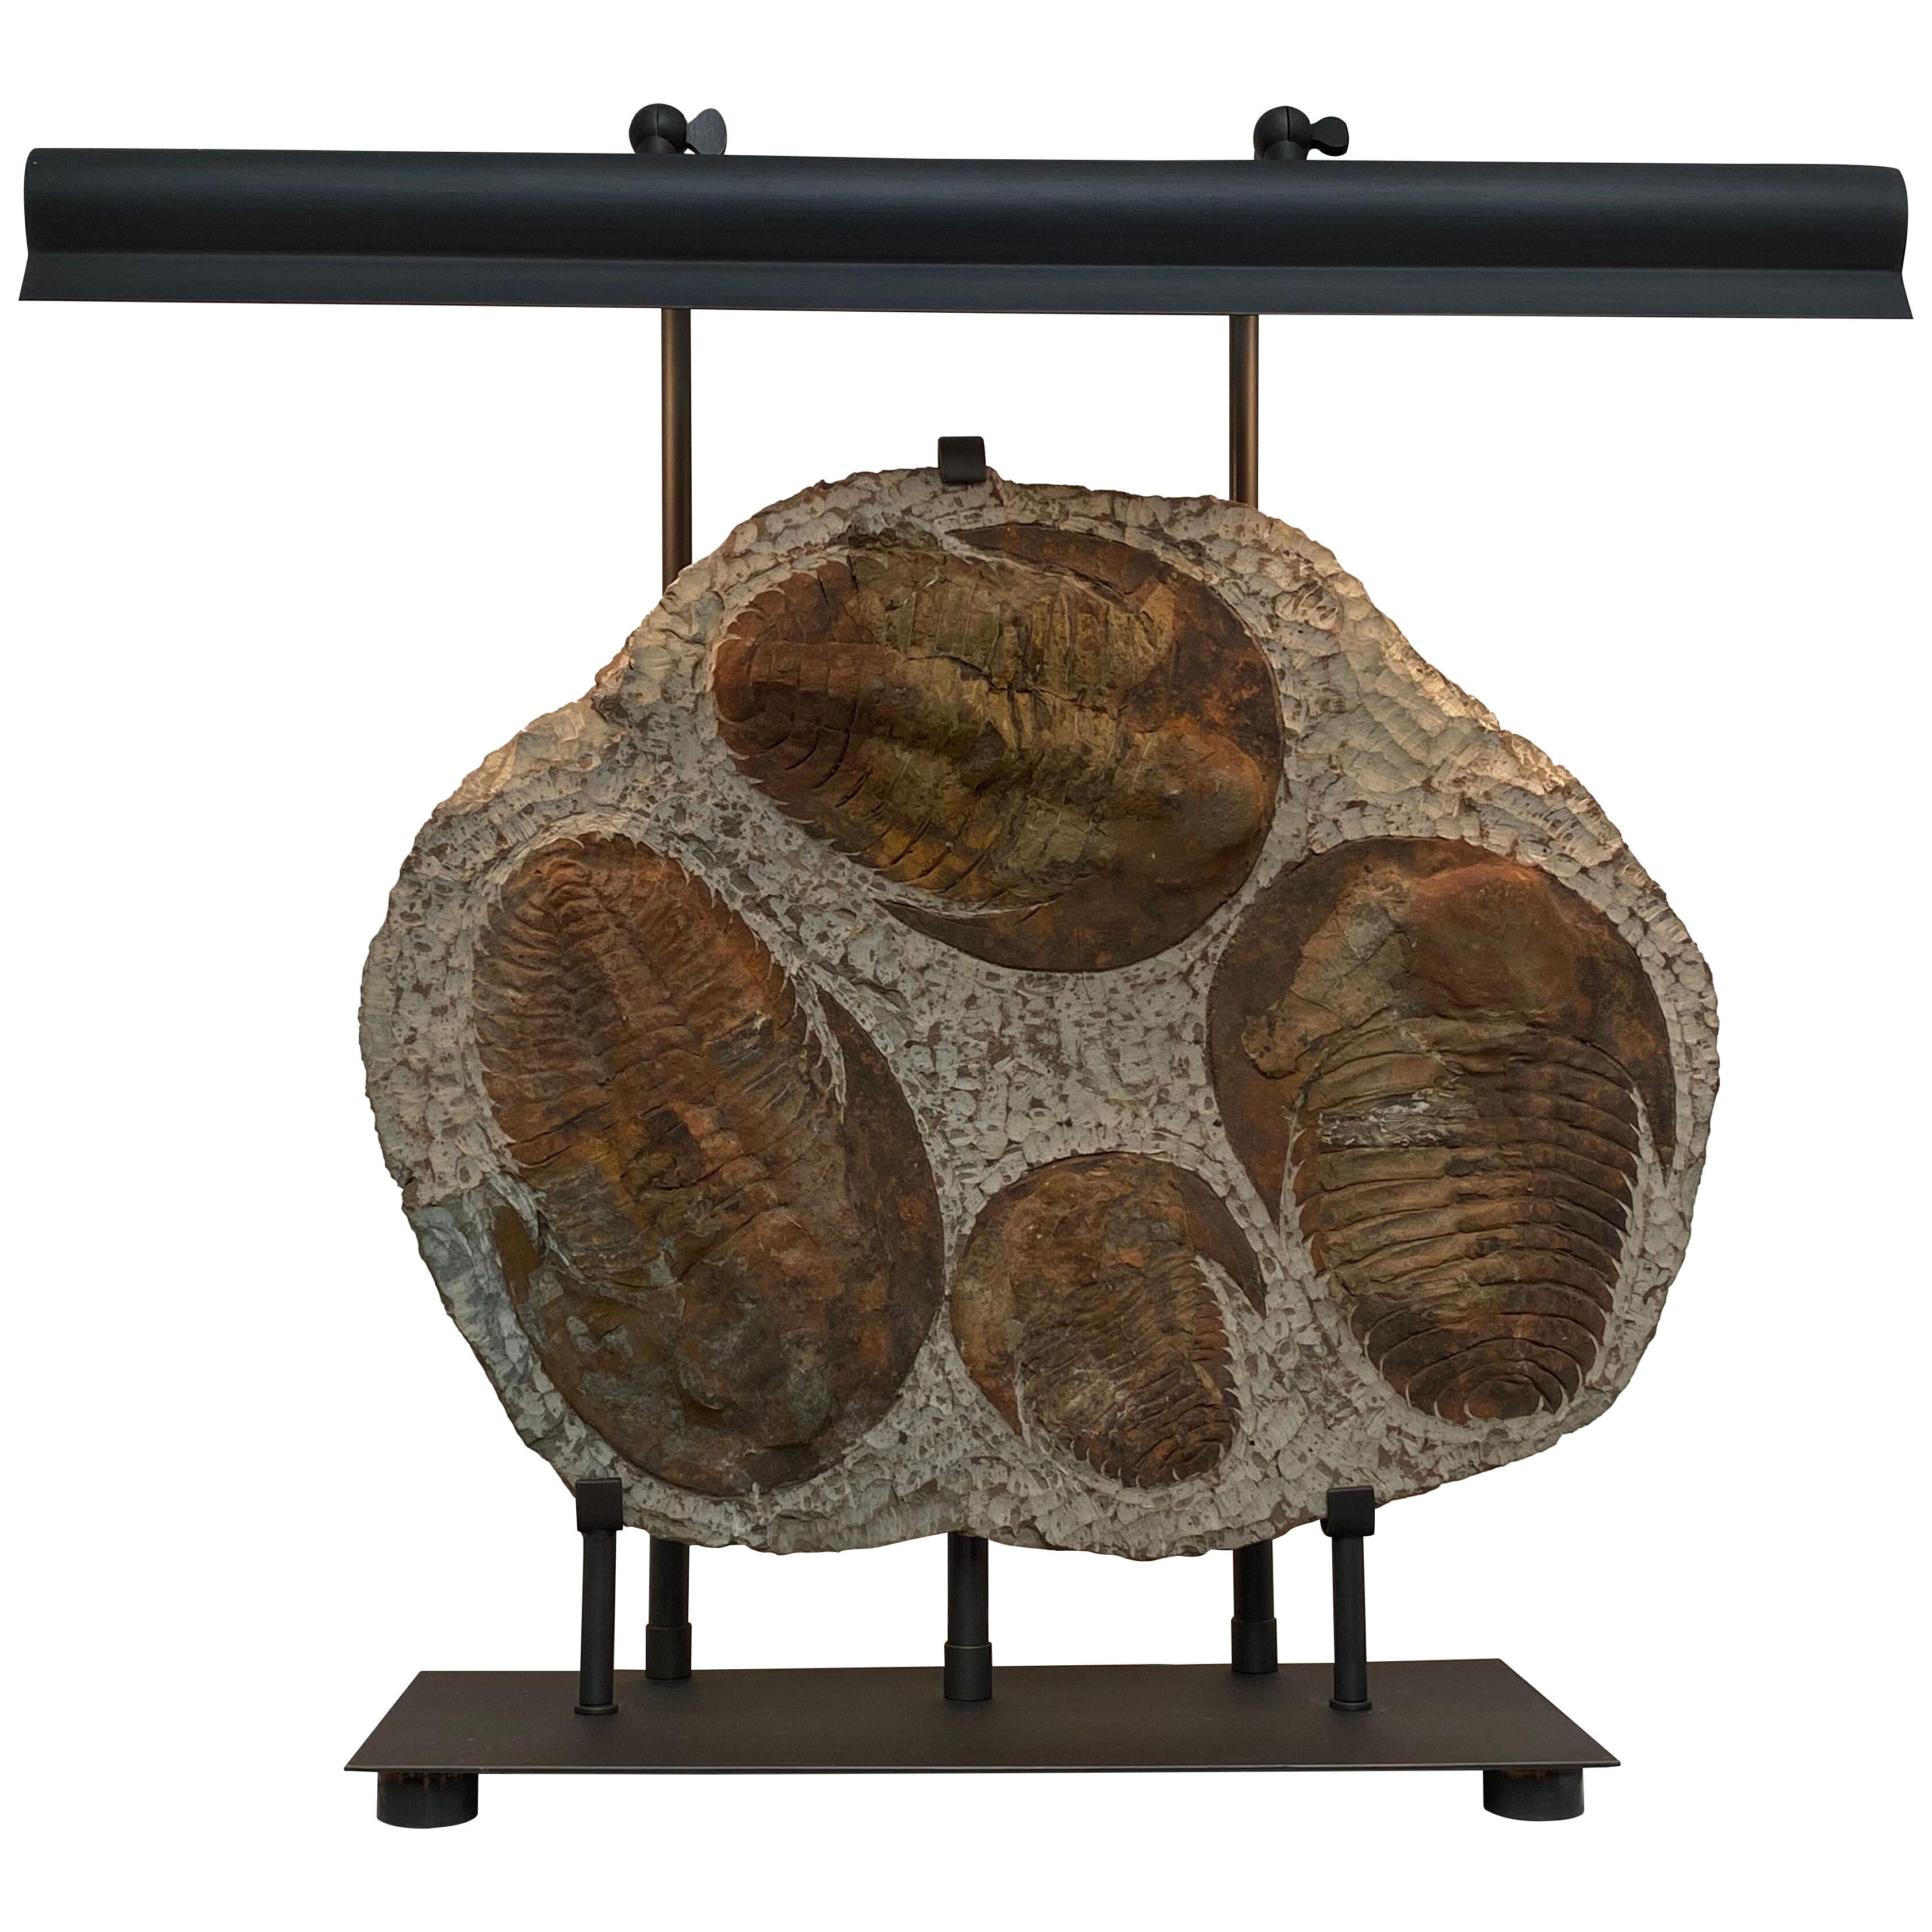 Fossil Mounted as a Lamp